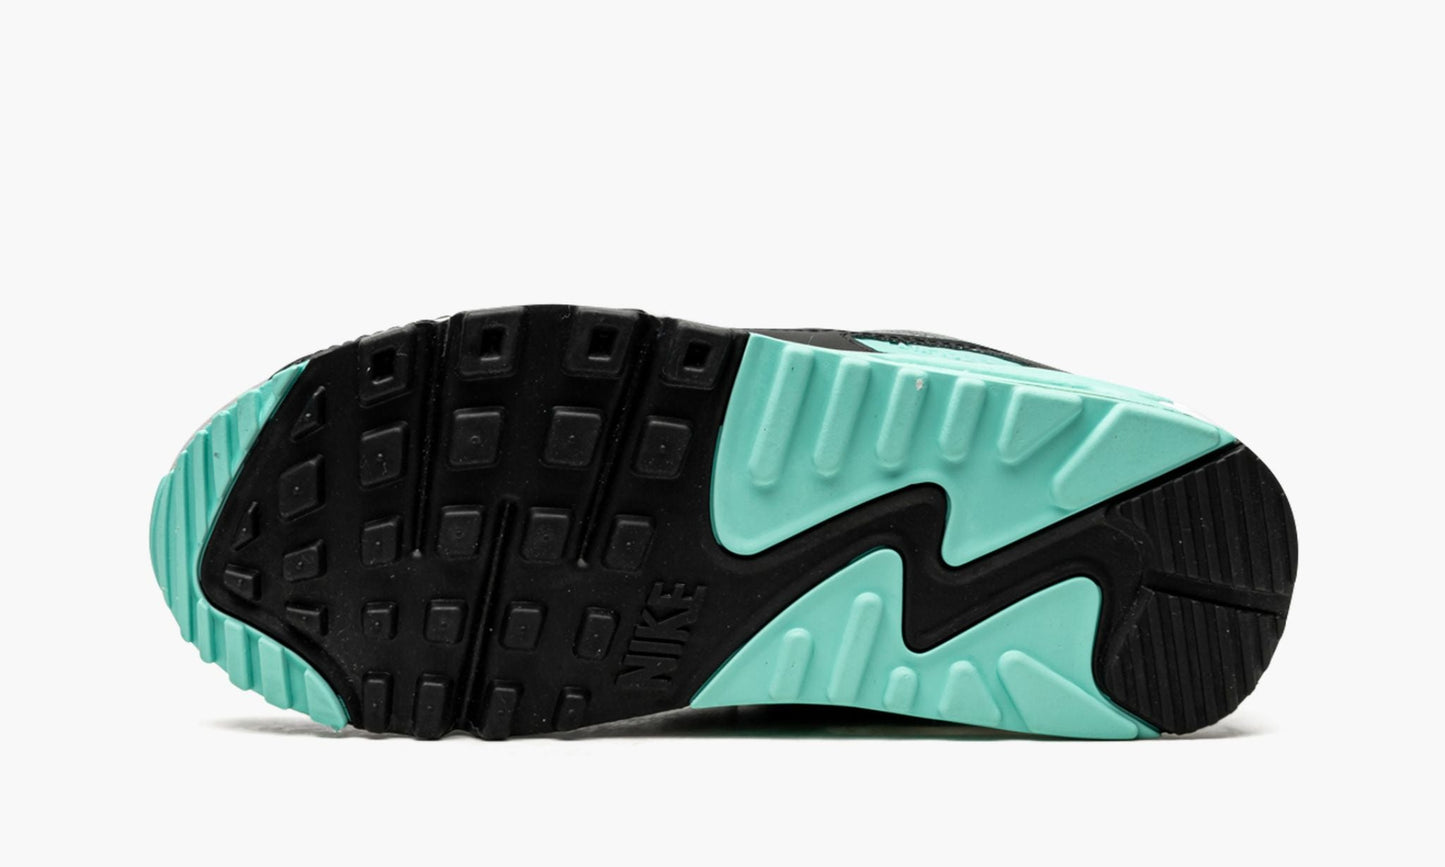 Air Max 90 W "Turquoise"